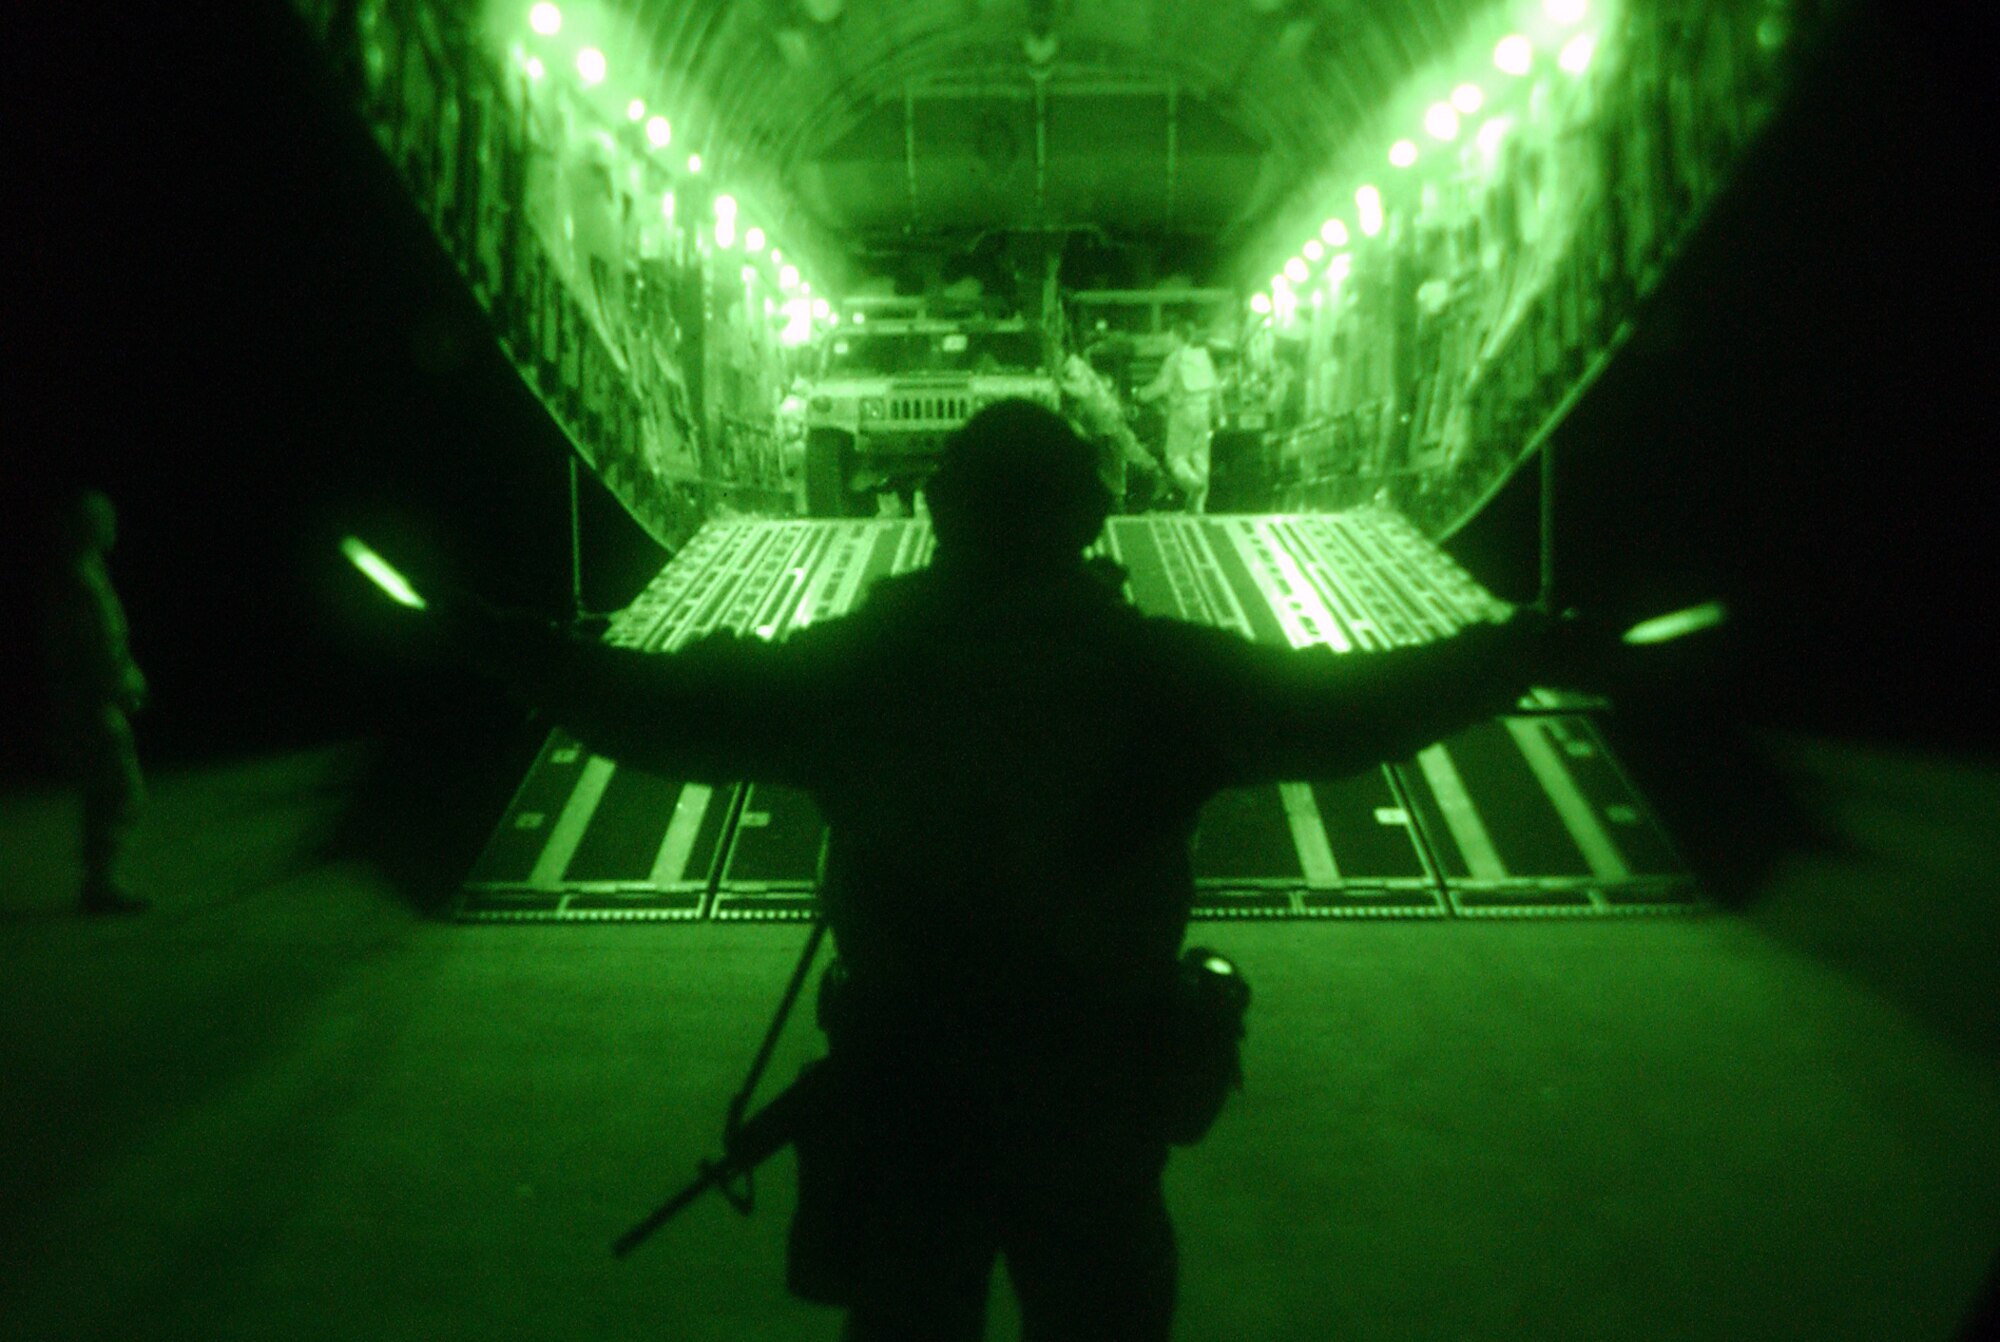 OPERATION IRAQI FREEDOM -- Master Sgt. Gerritt McCrory of the 86th Expeditionary Contingency Response Group marshals cargo and people from a C-17 Globemaster III aircraft during night operations March 30 at an airfield in northern Iraq.  (U.S. Air Force photo by Tech. Sgt. Rich Puckett)